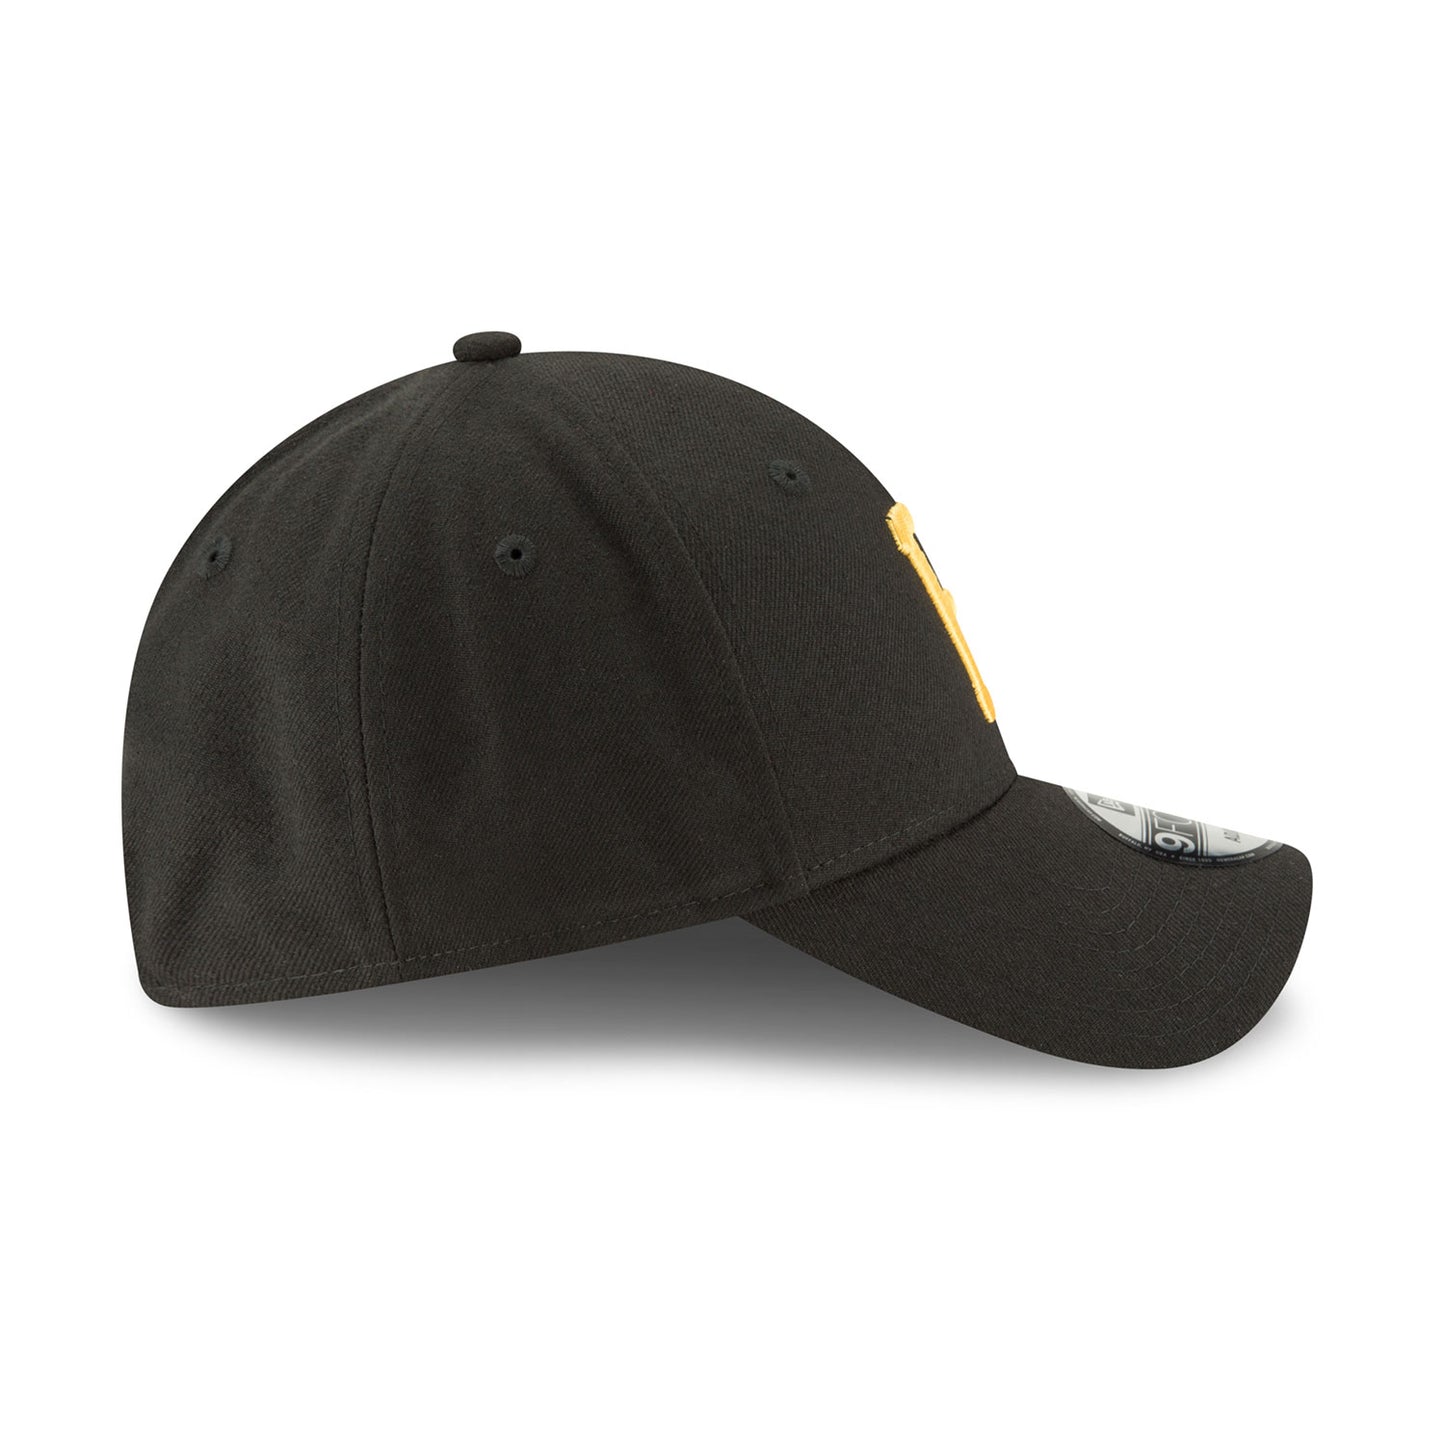 THE LEAGUE Pittsburgh Pirates 9FORTY New Era Cap